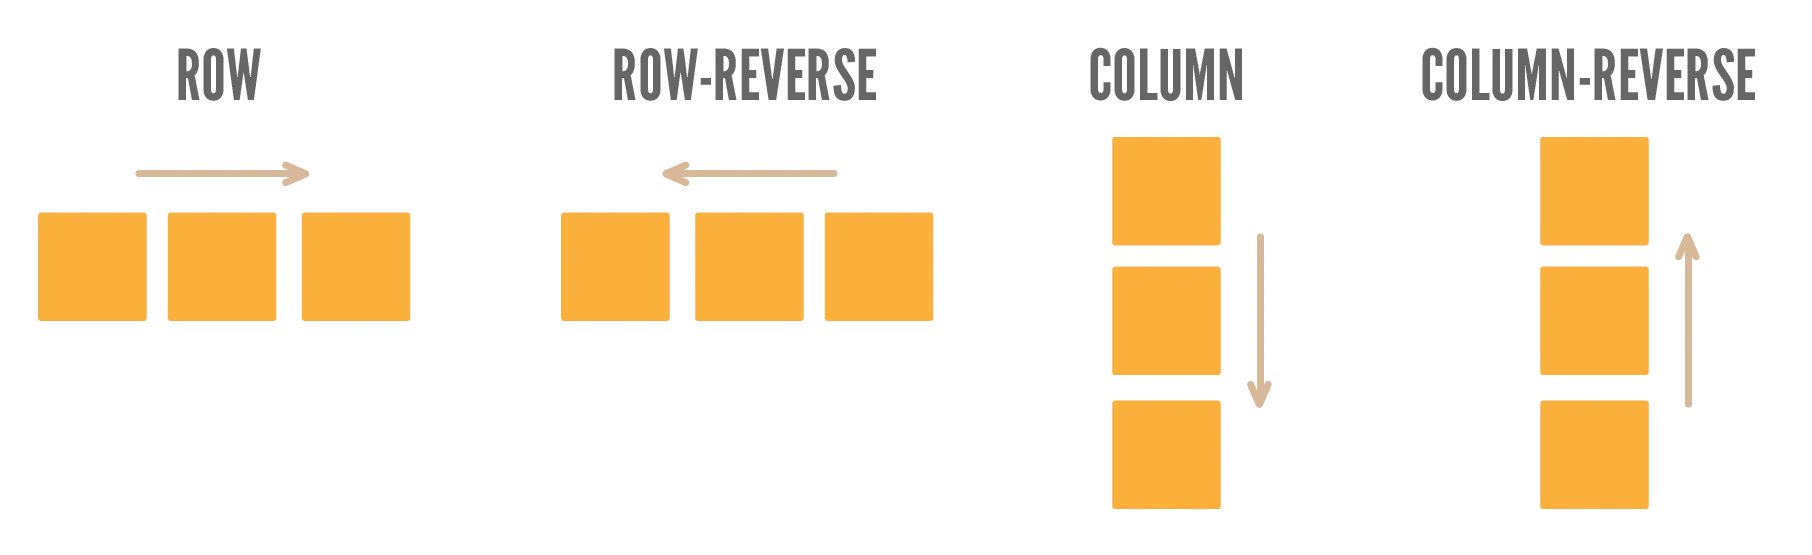 Example of the four different flexbox layout directions.